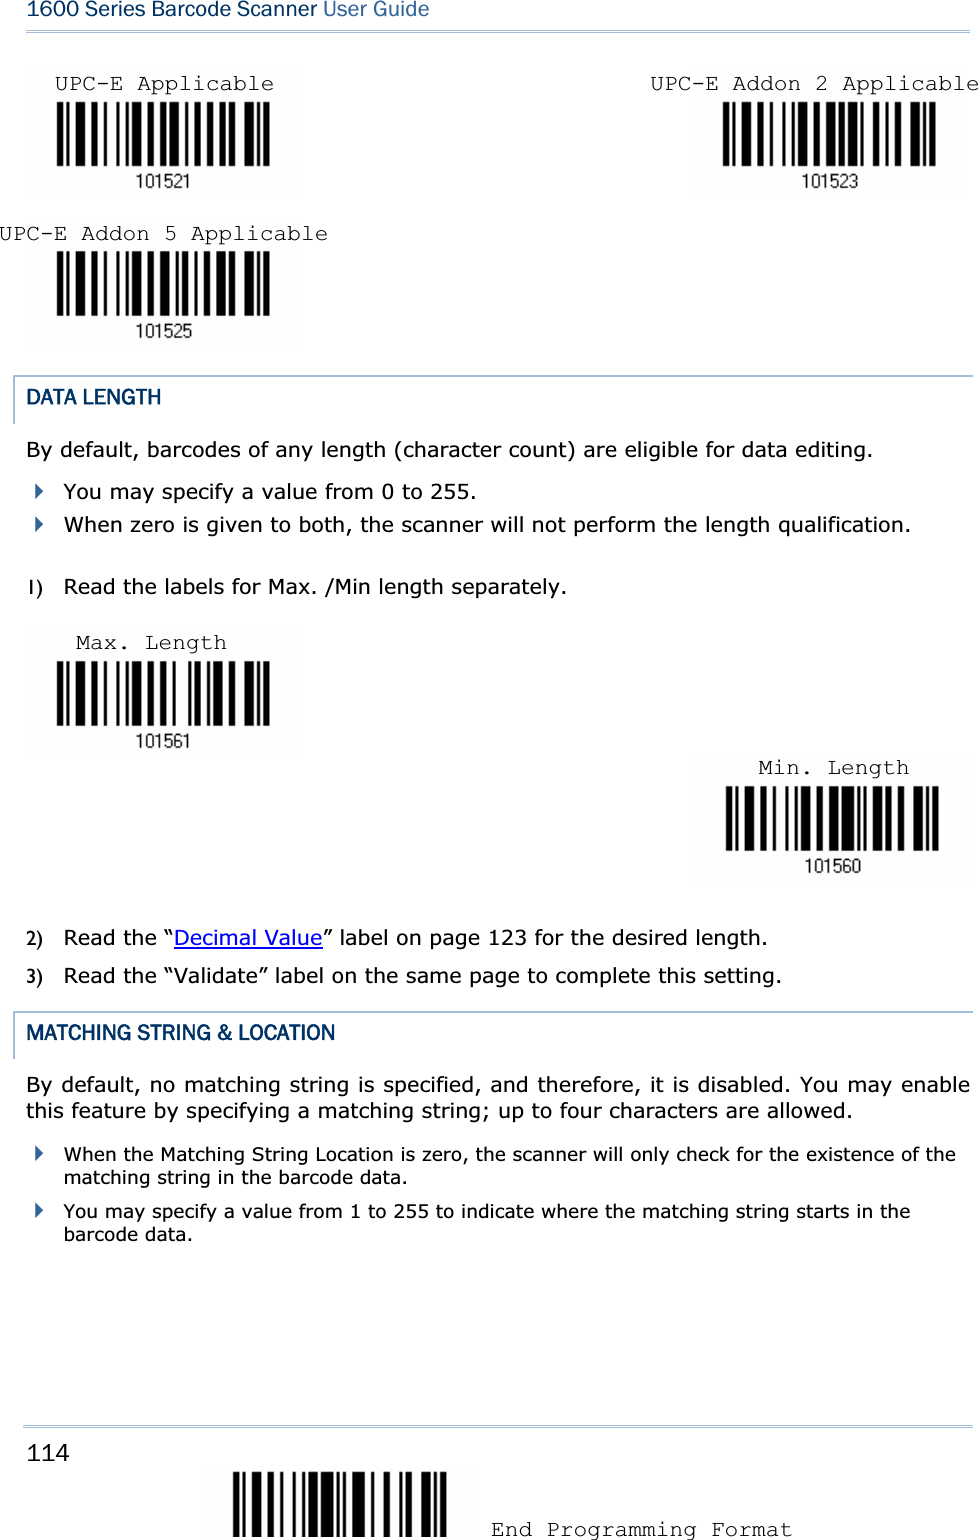 114 End Programming Format 1600 Series Barcode Scanner User Guide                                     DATA LENGTH By default, barcodes of any length (character count) are eligible for data editing.   You may specify a value from 0 to 255. When zero is given to both, the scanner will not perform the length qualification. 1) Read the labels for Max. /Min length separately. 2) Read the “Decimal Value” label on page 123 for the desired length.   3) Read the “Validate” label on the same page to complete this setting. MATCHING STRING &amp; LOCATION By default, no matching string is specified, and therefore, it is disabled. You may enable this feature by specifying a matching string; up to four characters are allowed. When the Matching String Location is zero, the scanner will only check for the existence of the matching string in the barcode data. You may specify a value from 1 to 255 to indicate where the matching string starts in the barcode data. UPC-E Applicable  UPC-E Addon 2 ApplicableUPC-E Addon 5 Applicable Max. Length Min. Length